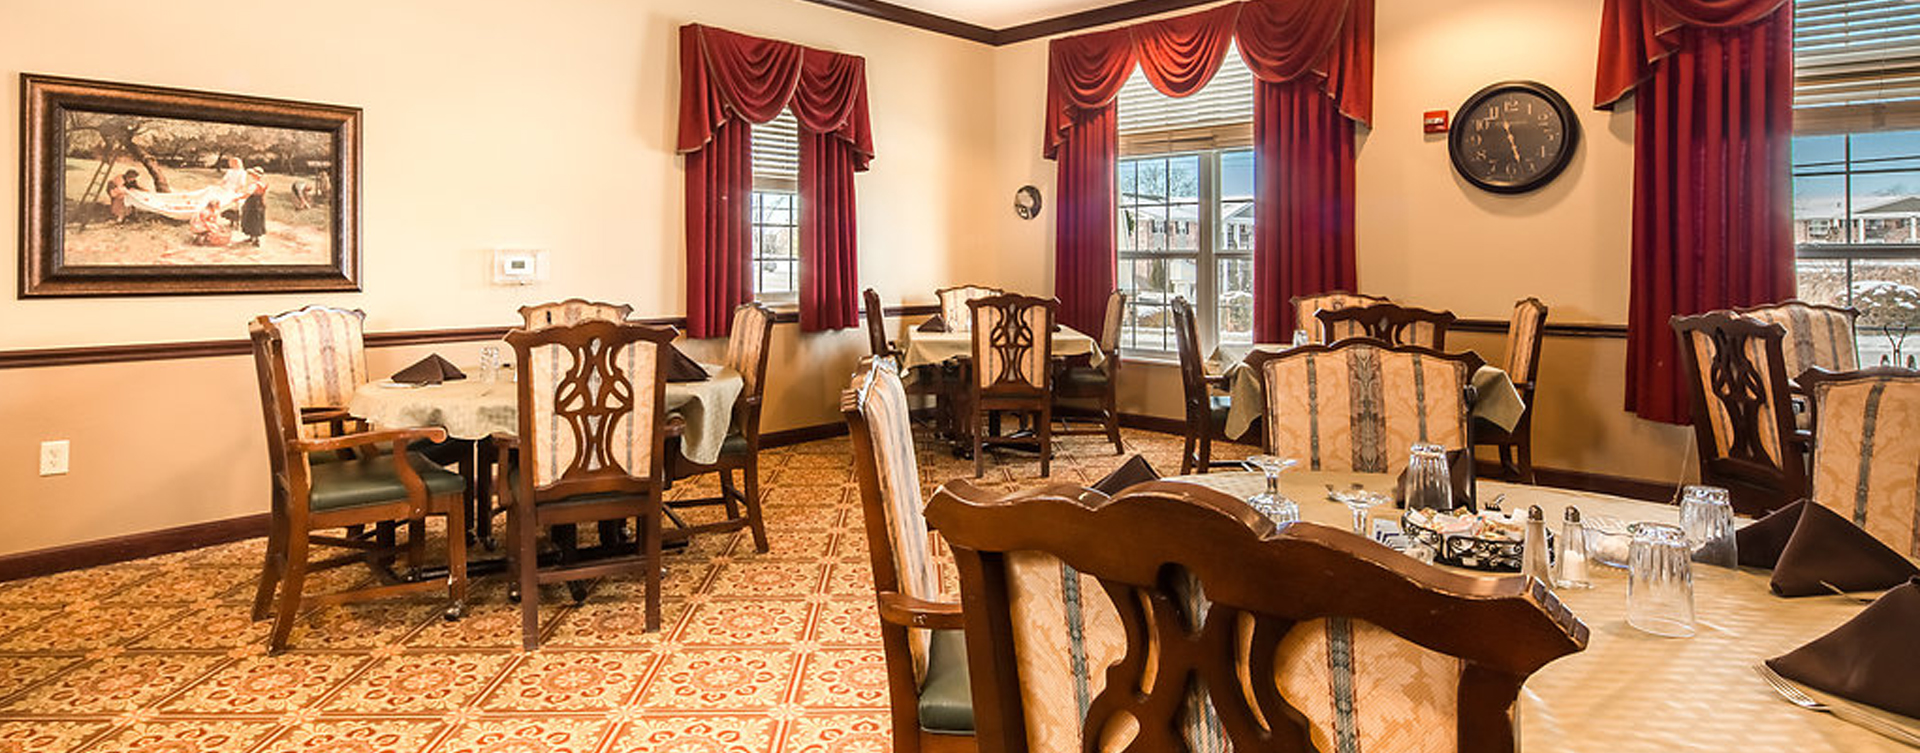 Food is best when shared with friends in the dining room at Bickford of Okemos